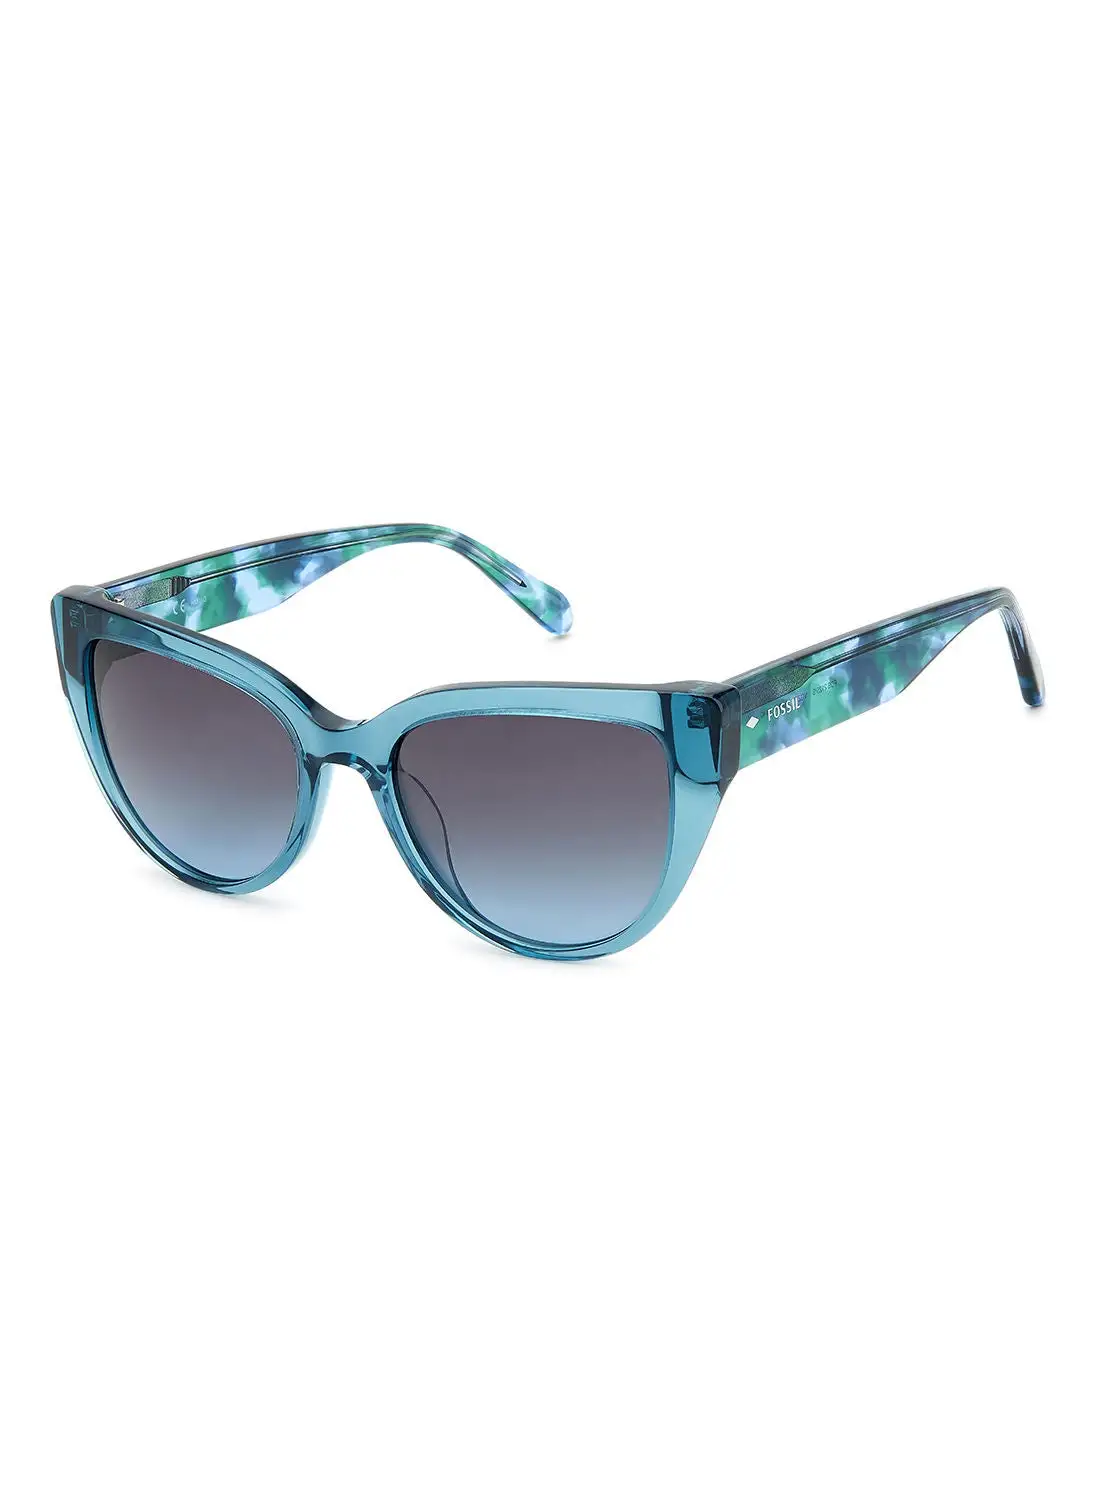 FOSSIL Women's UV Protection Cat Eye Sunglasses - Fos 2125/S Cry Teal 52 - Lens Size: 52 Mm